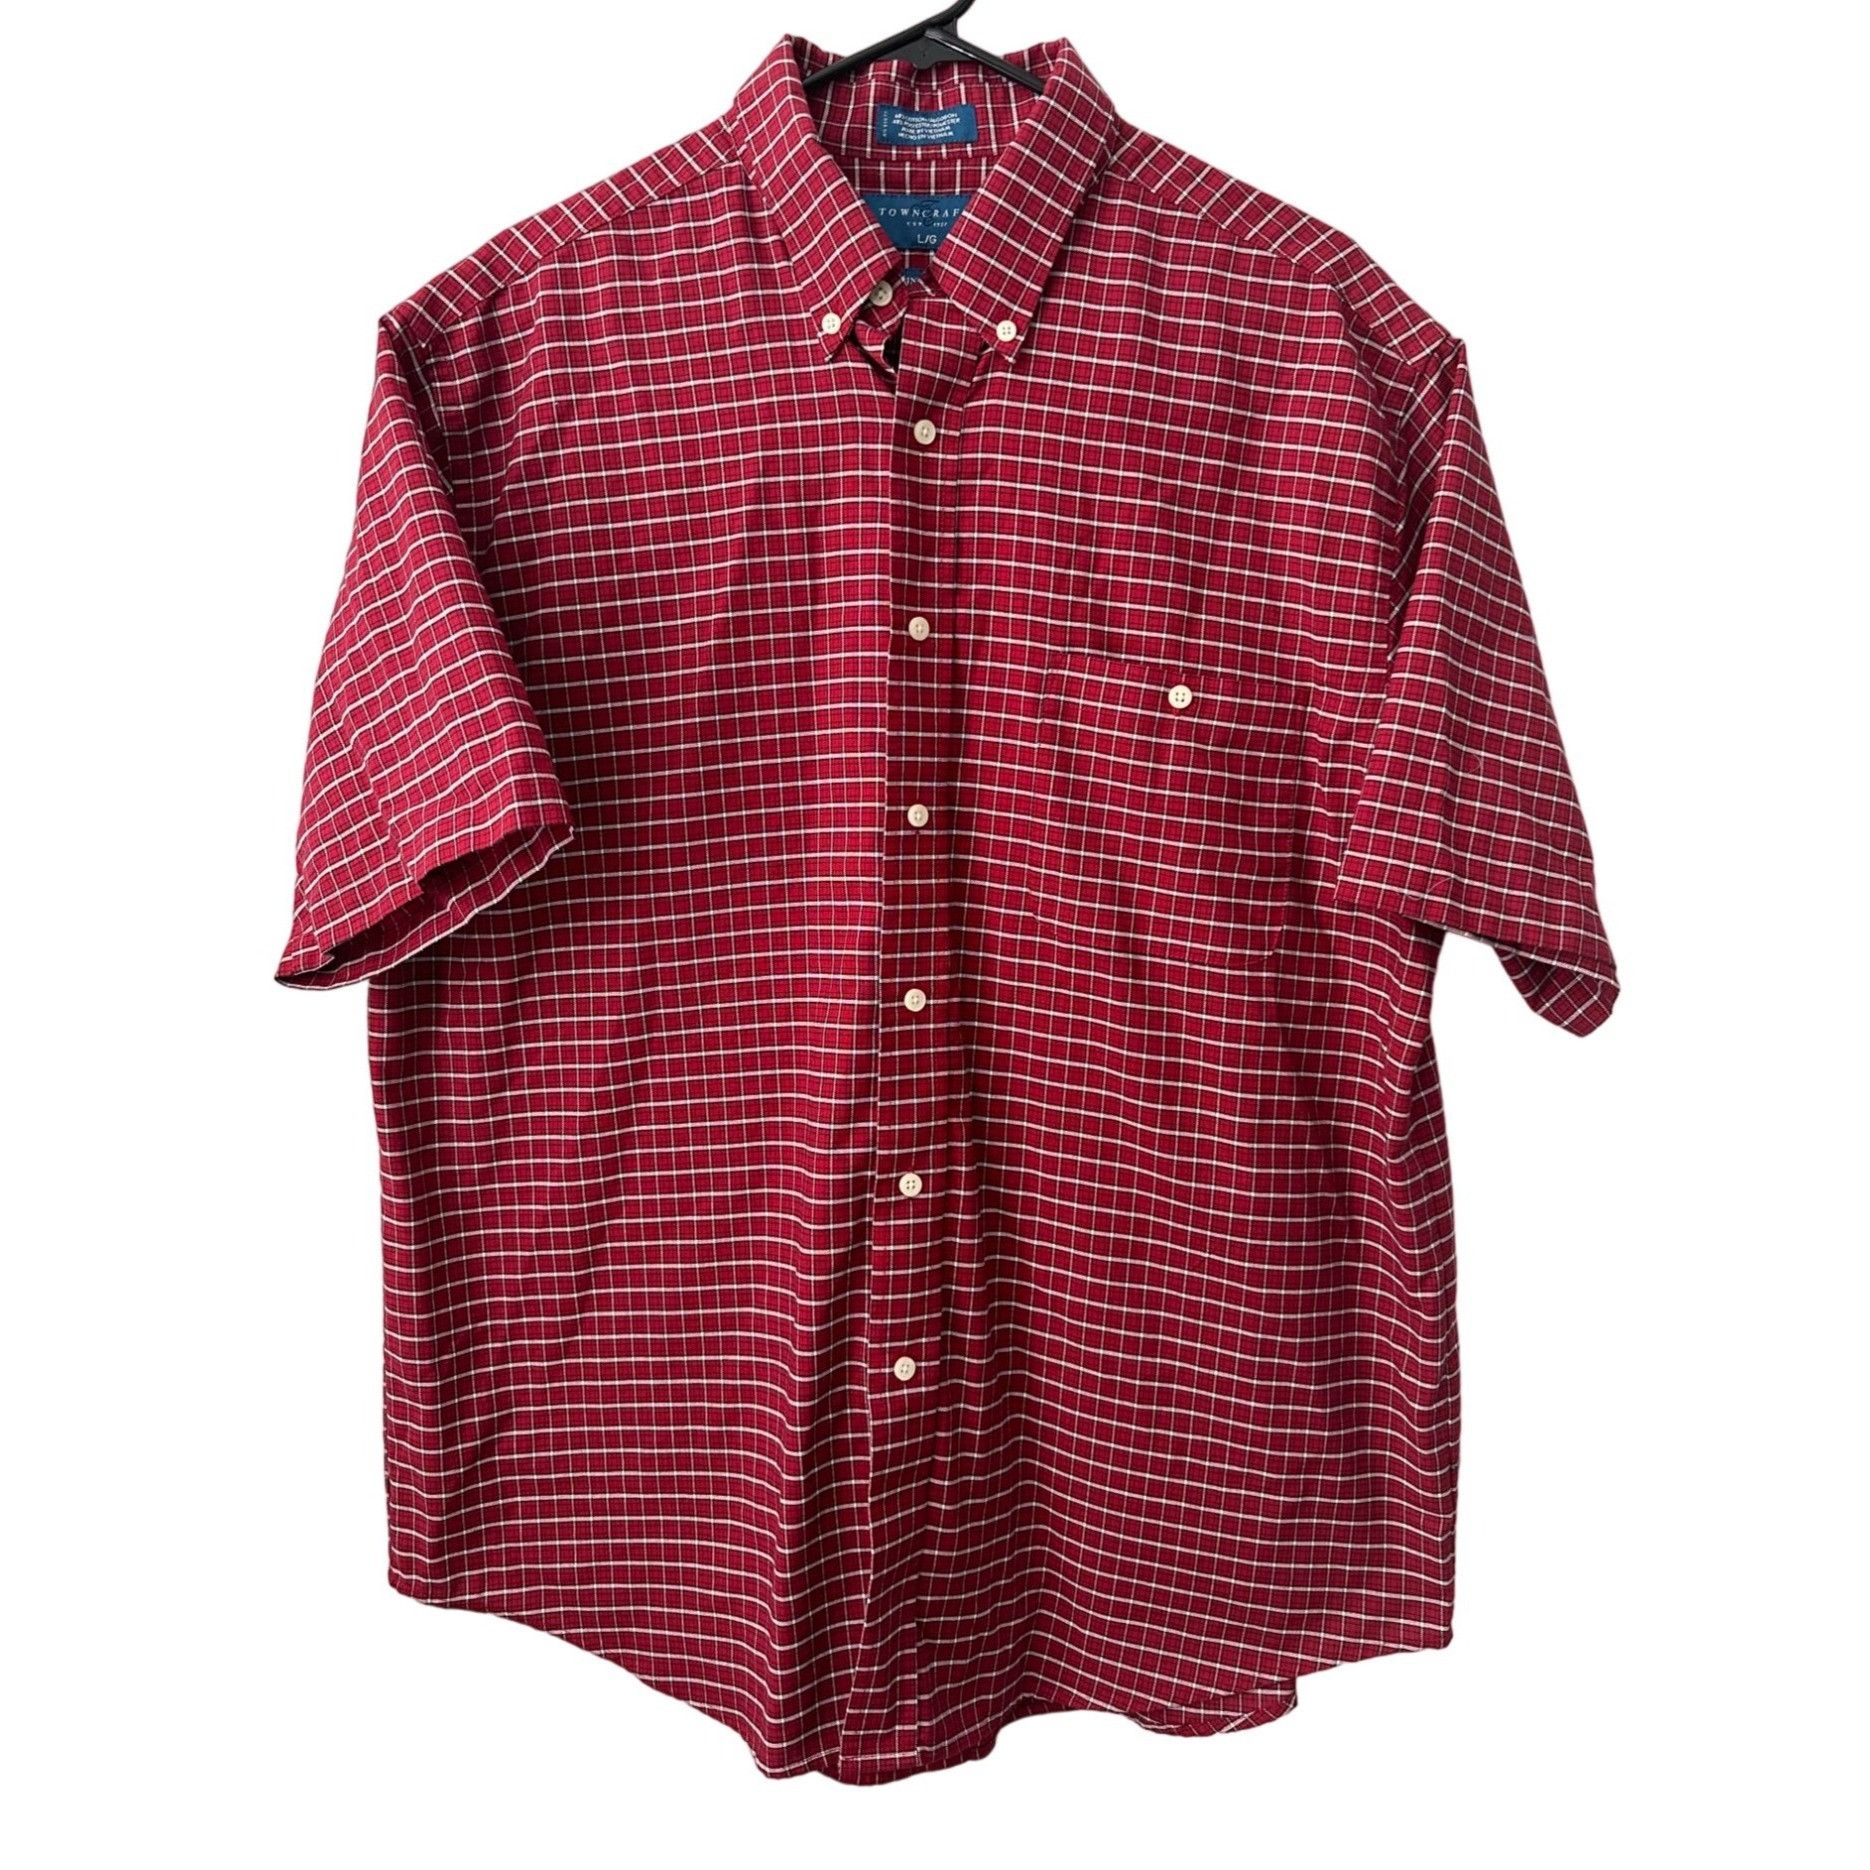 Towncraft Towncraft Mens Shirt Large Red White Black Checks Button Dow ...